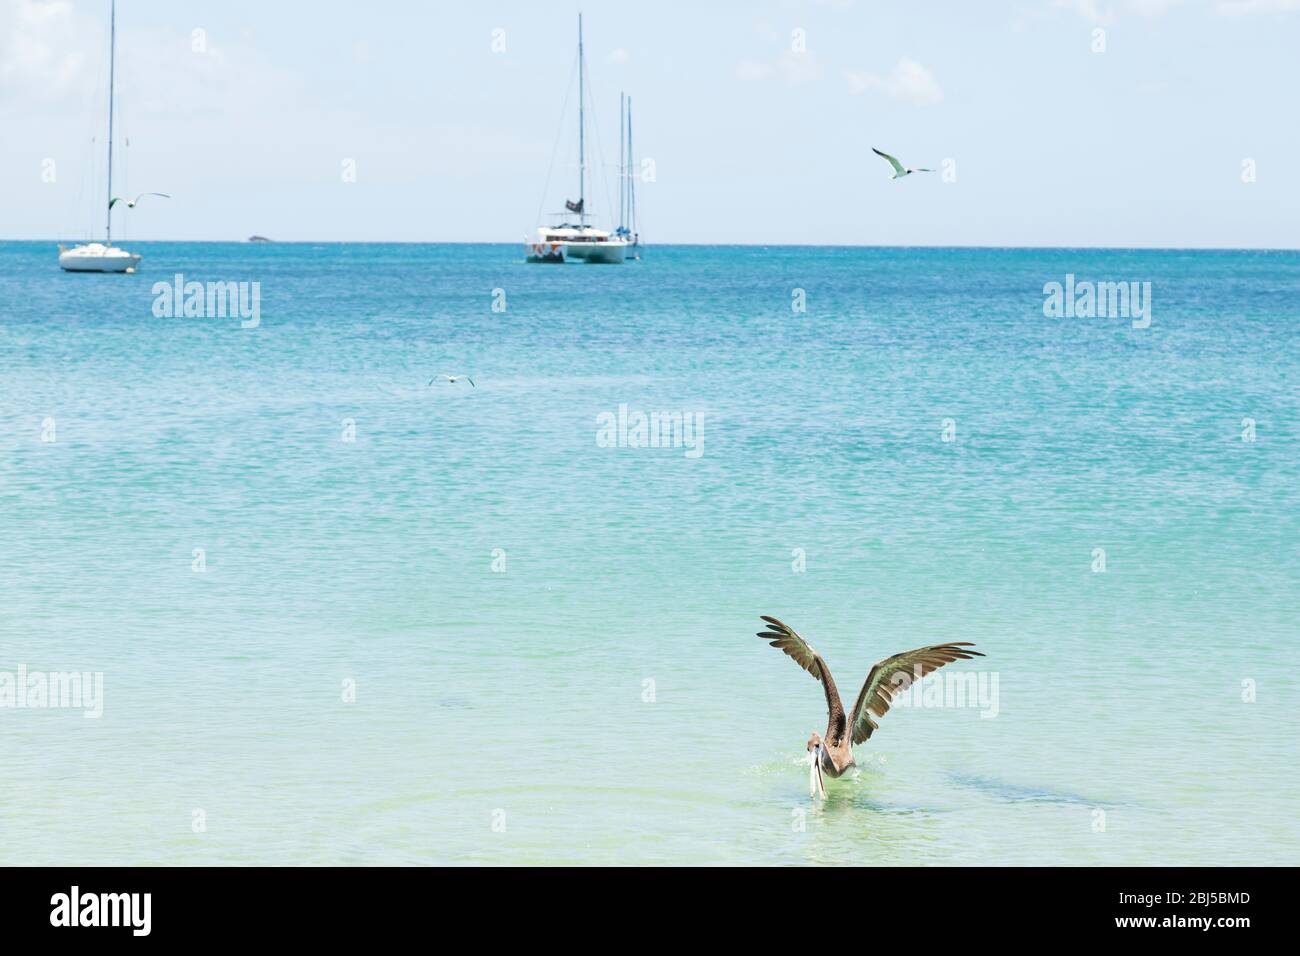 a pelican bottom of image opens its bill to get a fish with yachts in the background Stock Photo